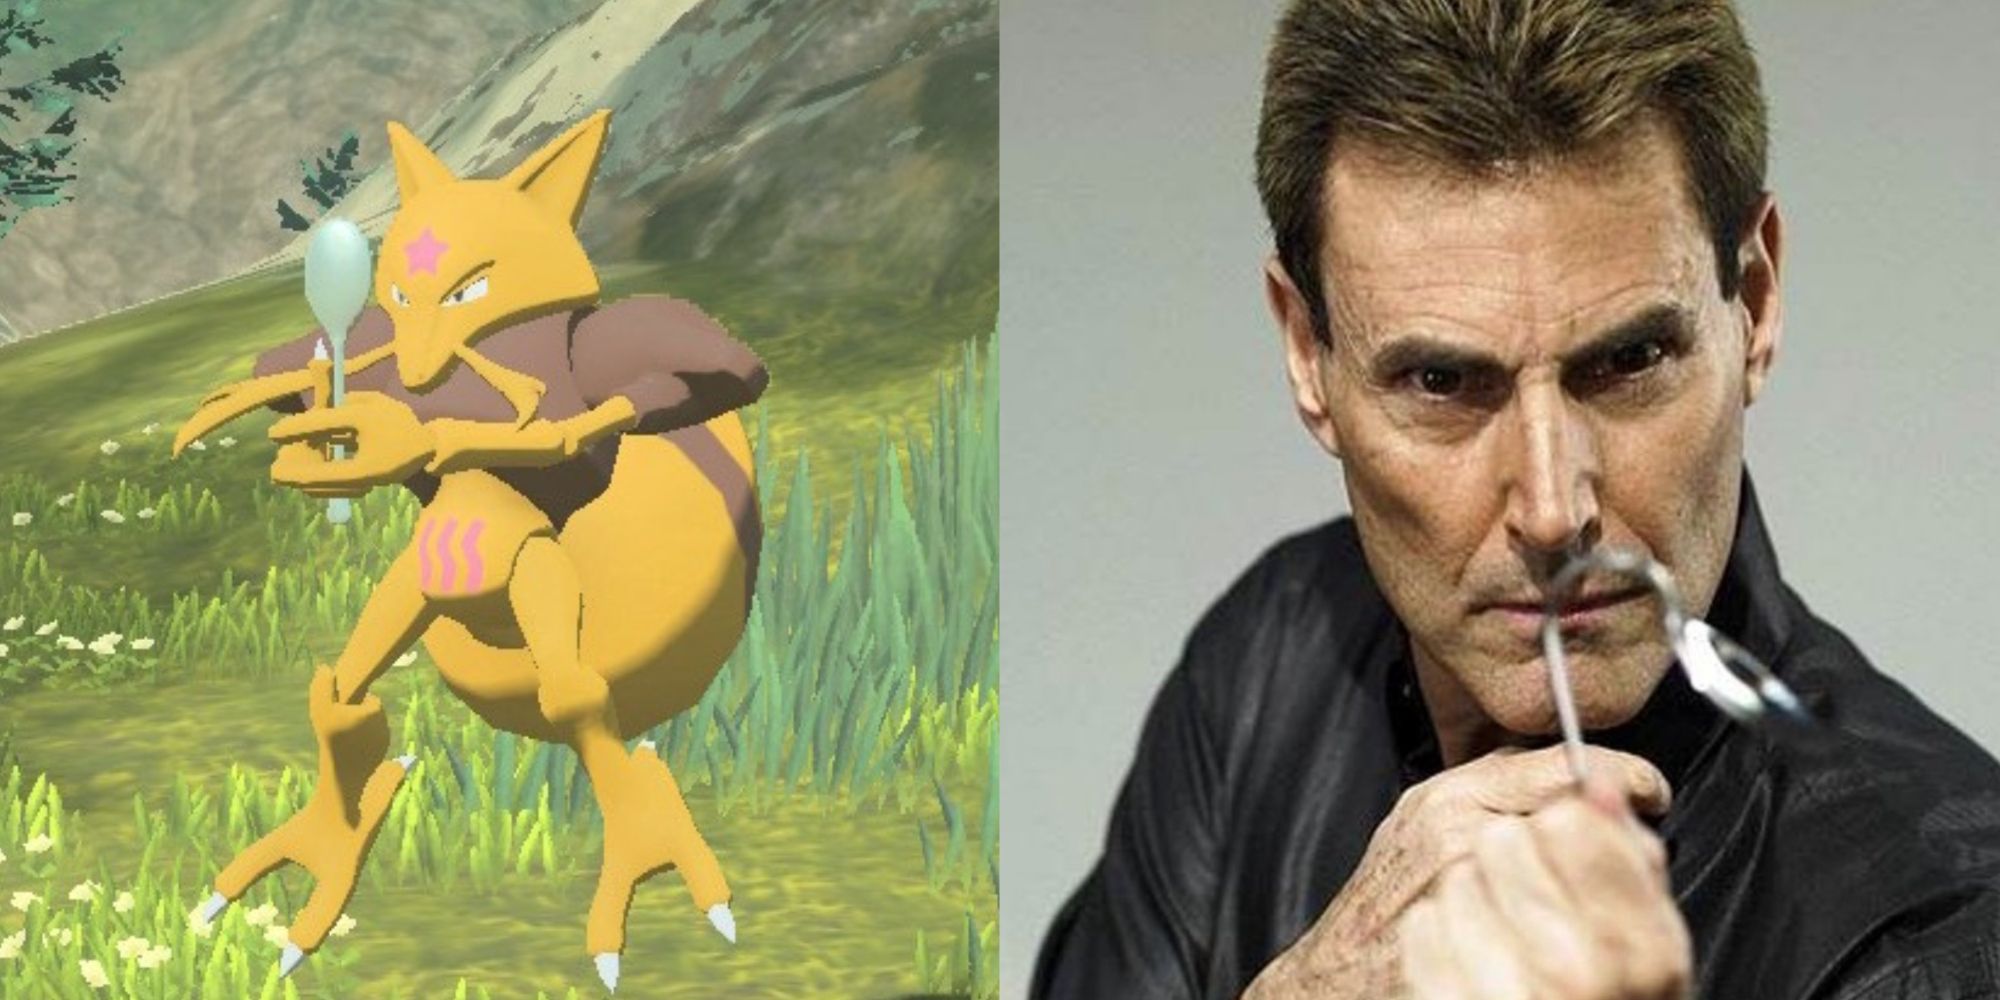 Kadabra holding its spoon, Uri Geller bending a spoon with his mind